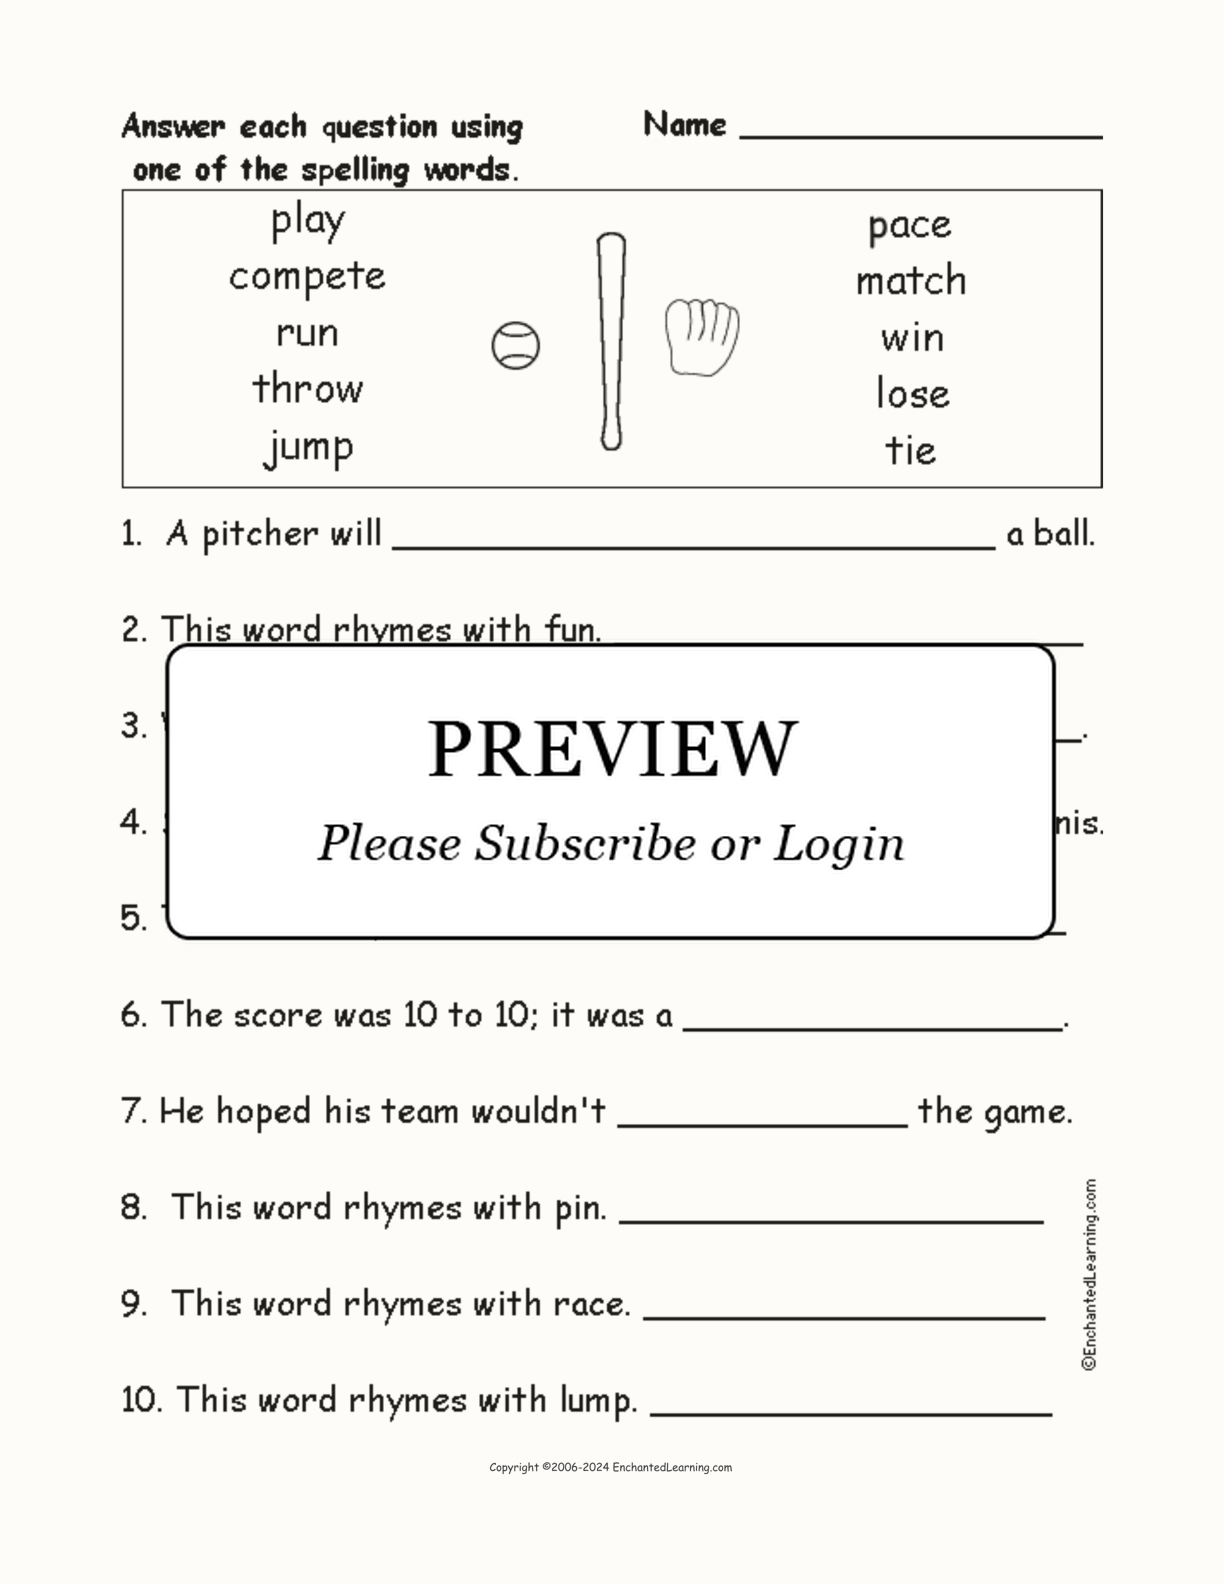 Sports Spelling Word Questions interactive worksheet page 1